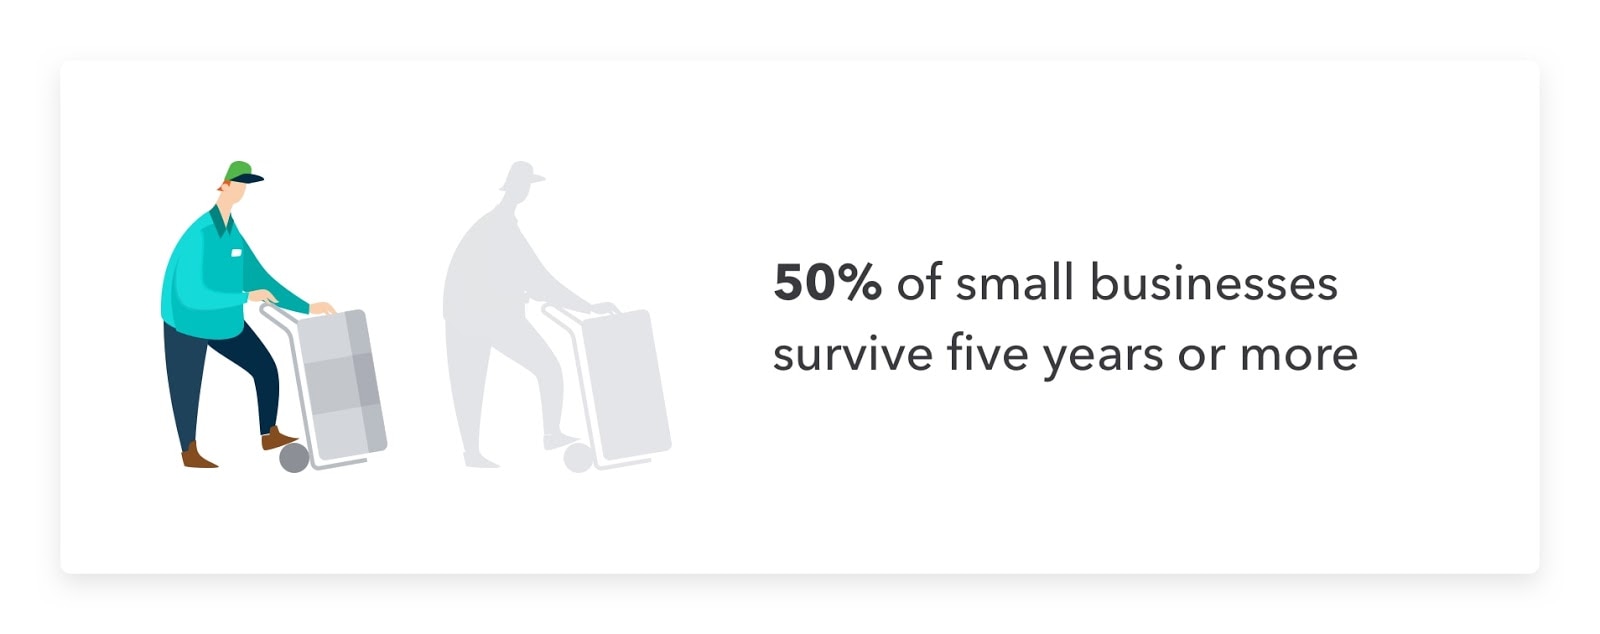 Small business survival rates within first five years.